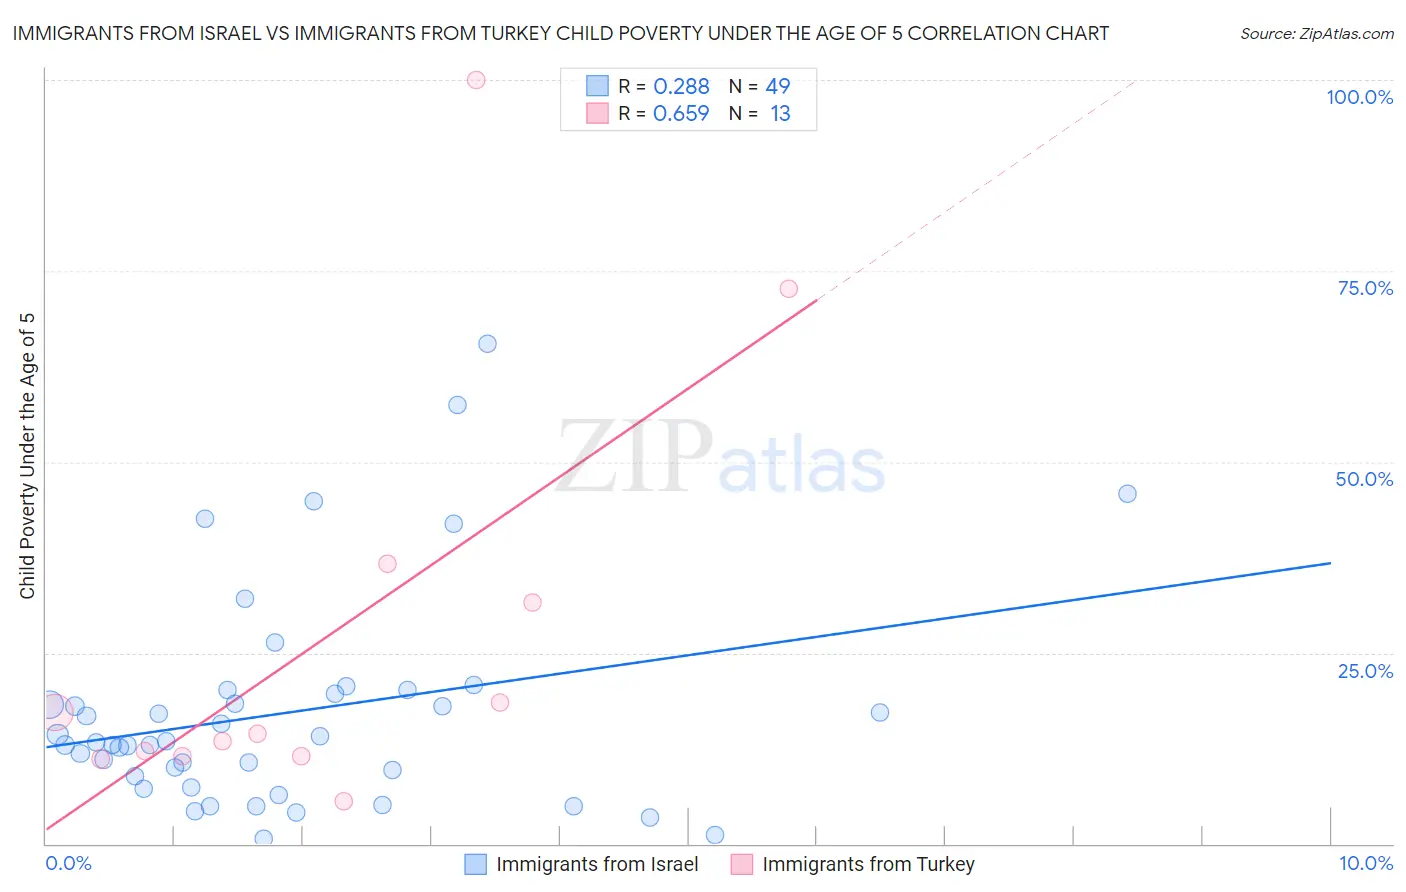 Immigrants from Israel vs Immigrants from Turkey Child Poverty Under the Age of 5